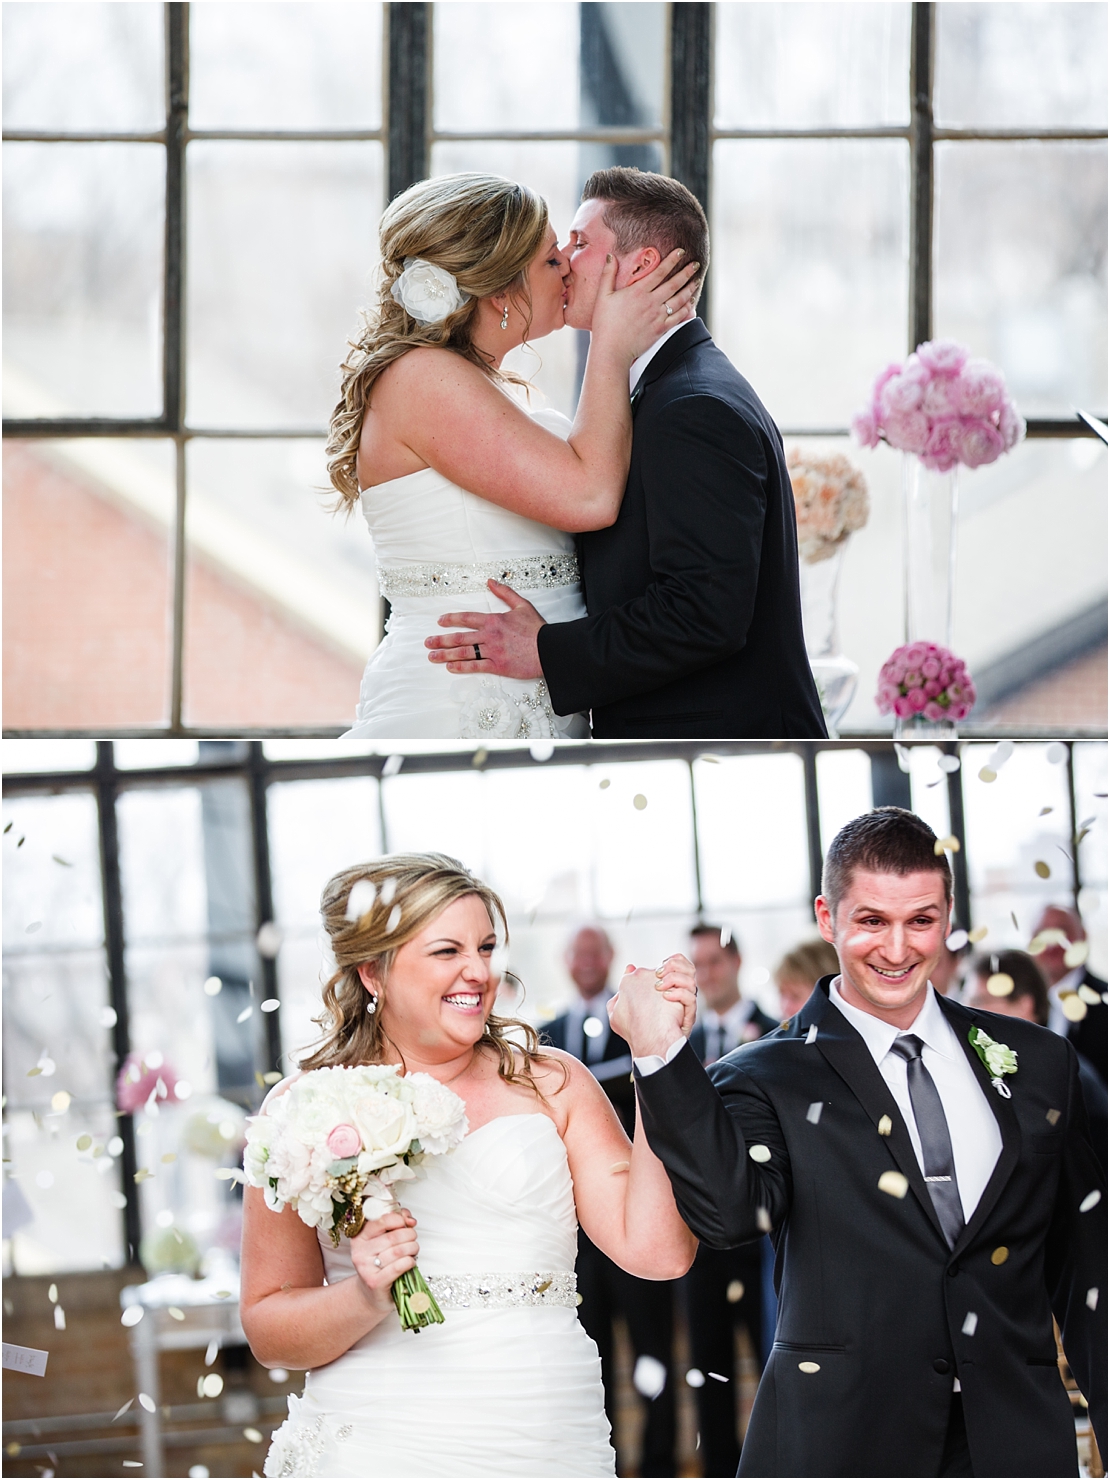 Ravenswood Event Center Wedding | Second Shooting with Jordan Quinn Photography | Chicago Wedding Photographer - Jill Tiongco Photography